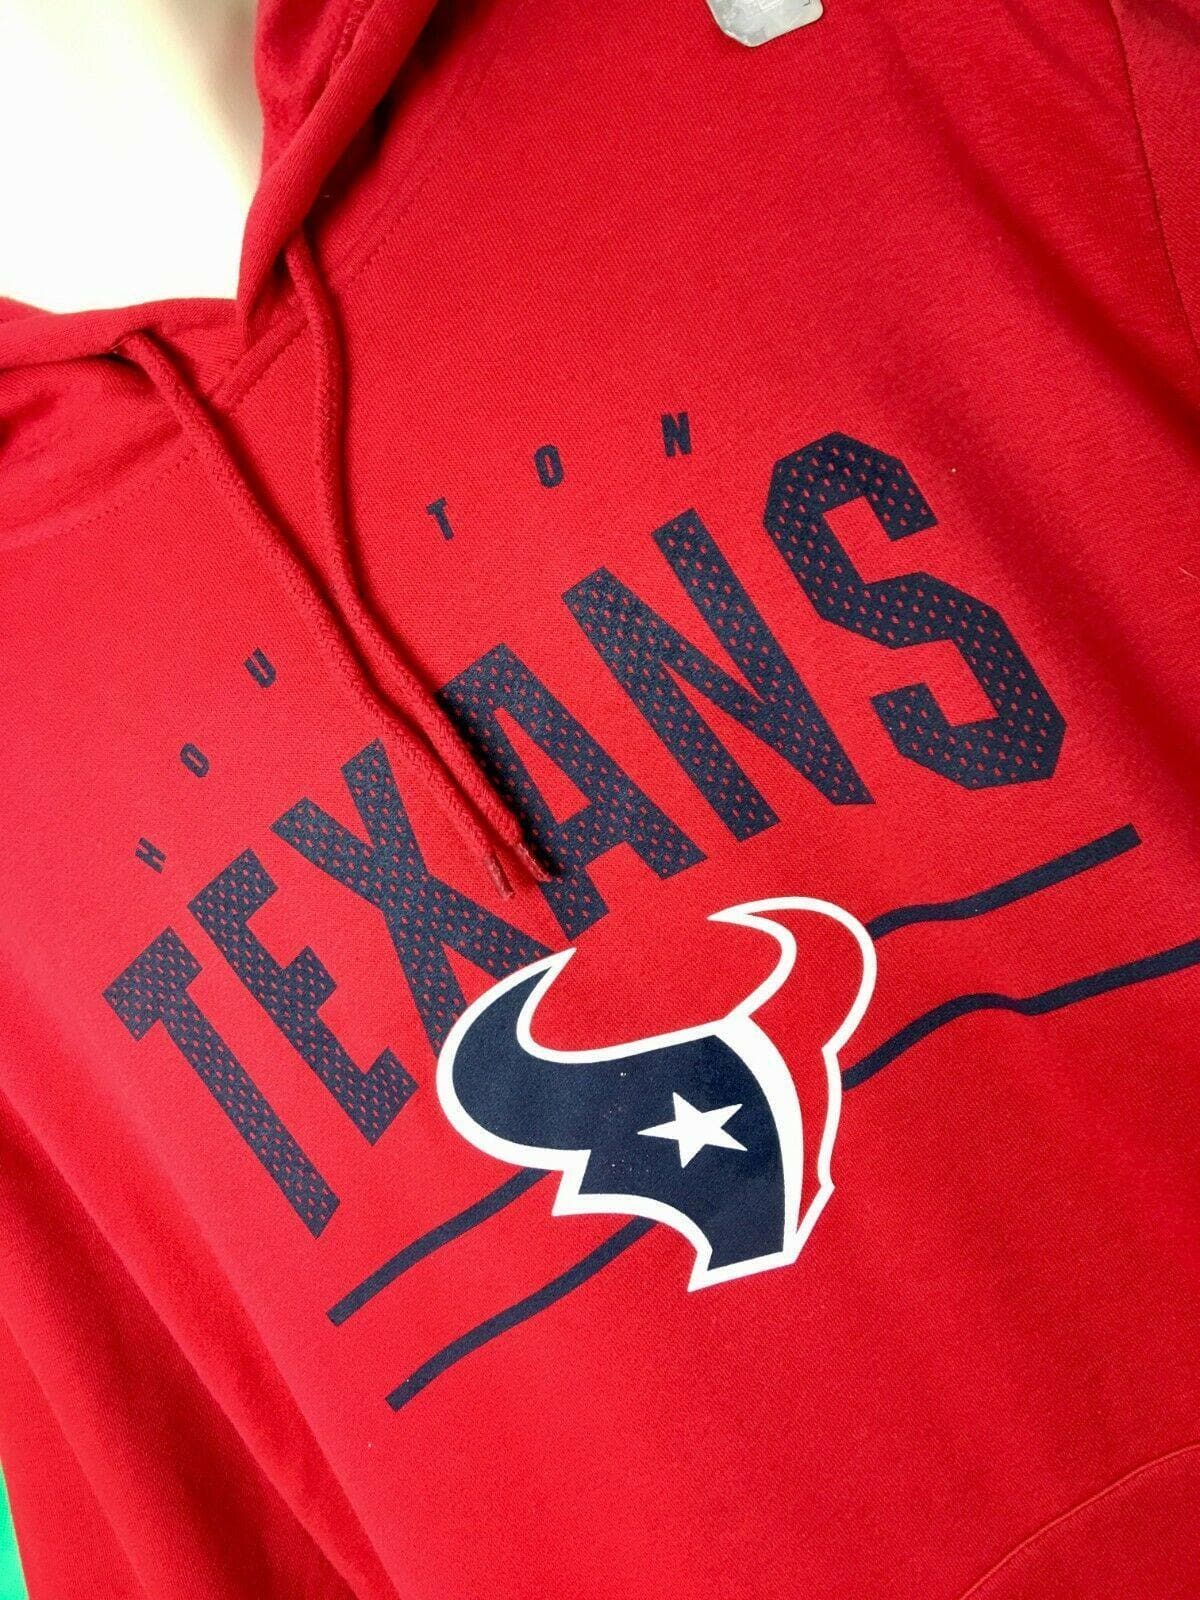 NFL Houston Texans Red Pullover Hoodie Men's 2X-Large NWT